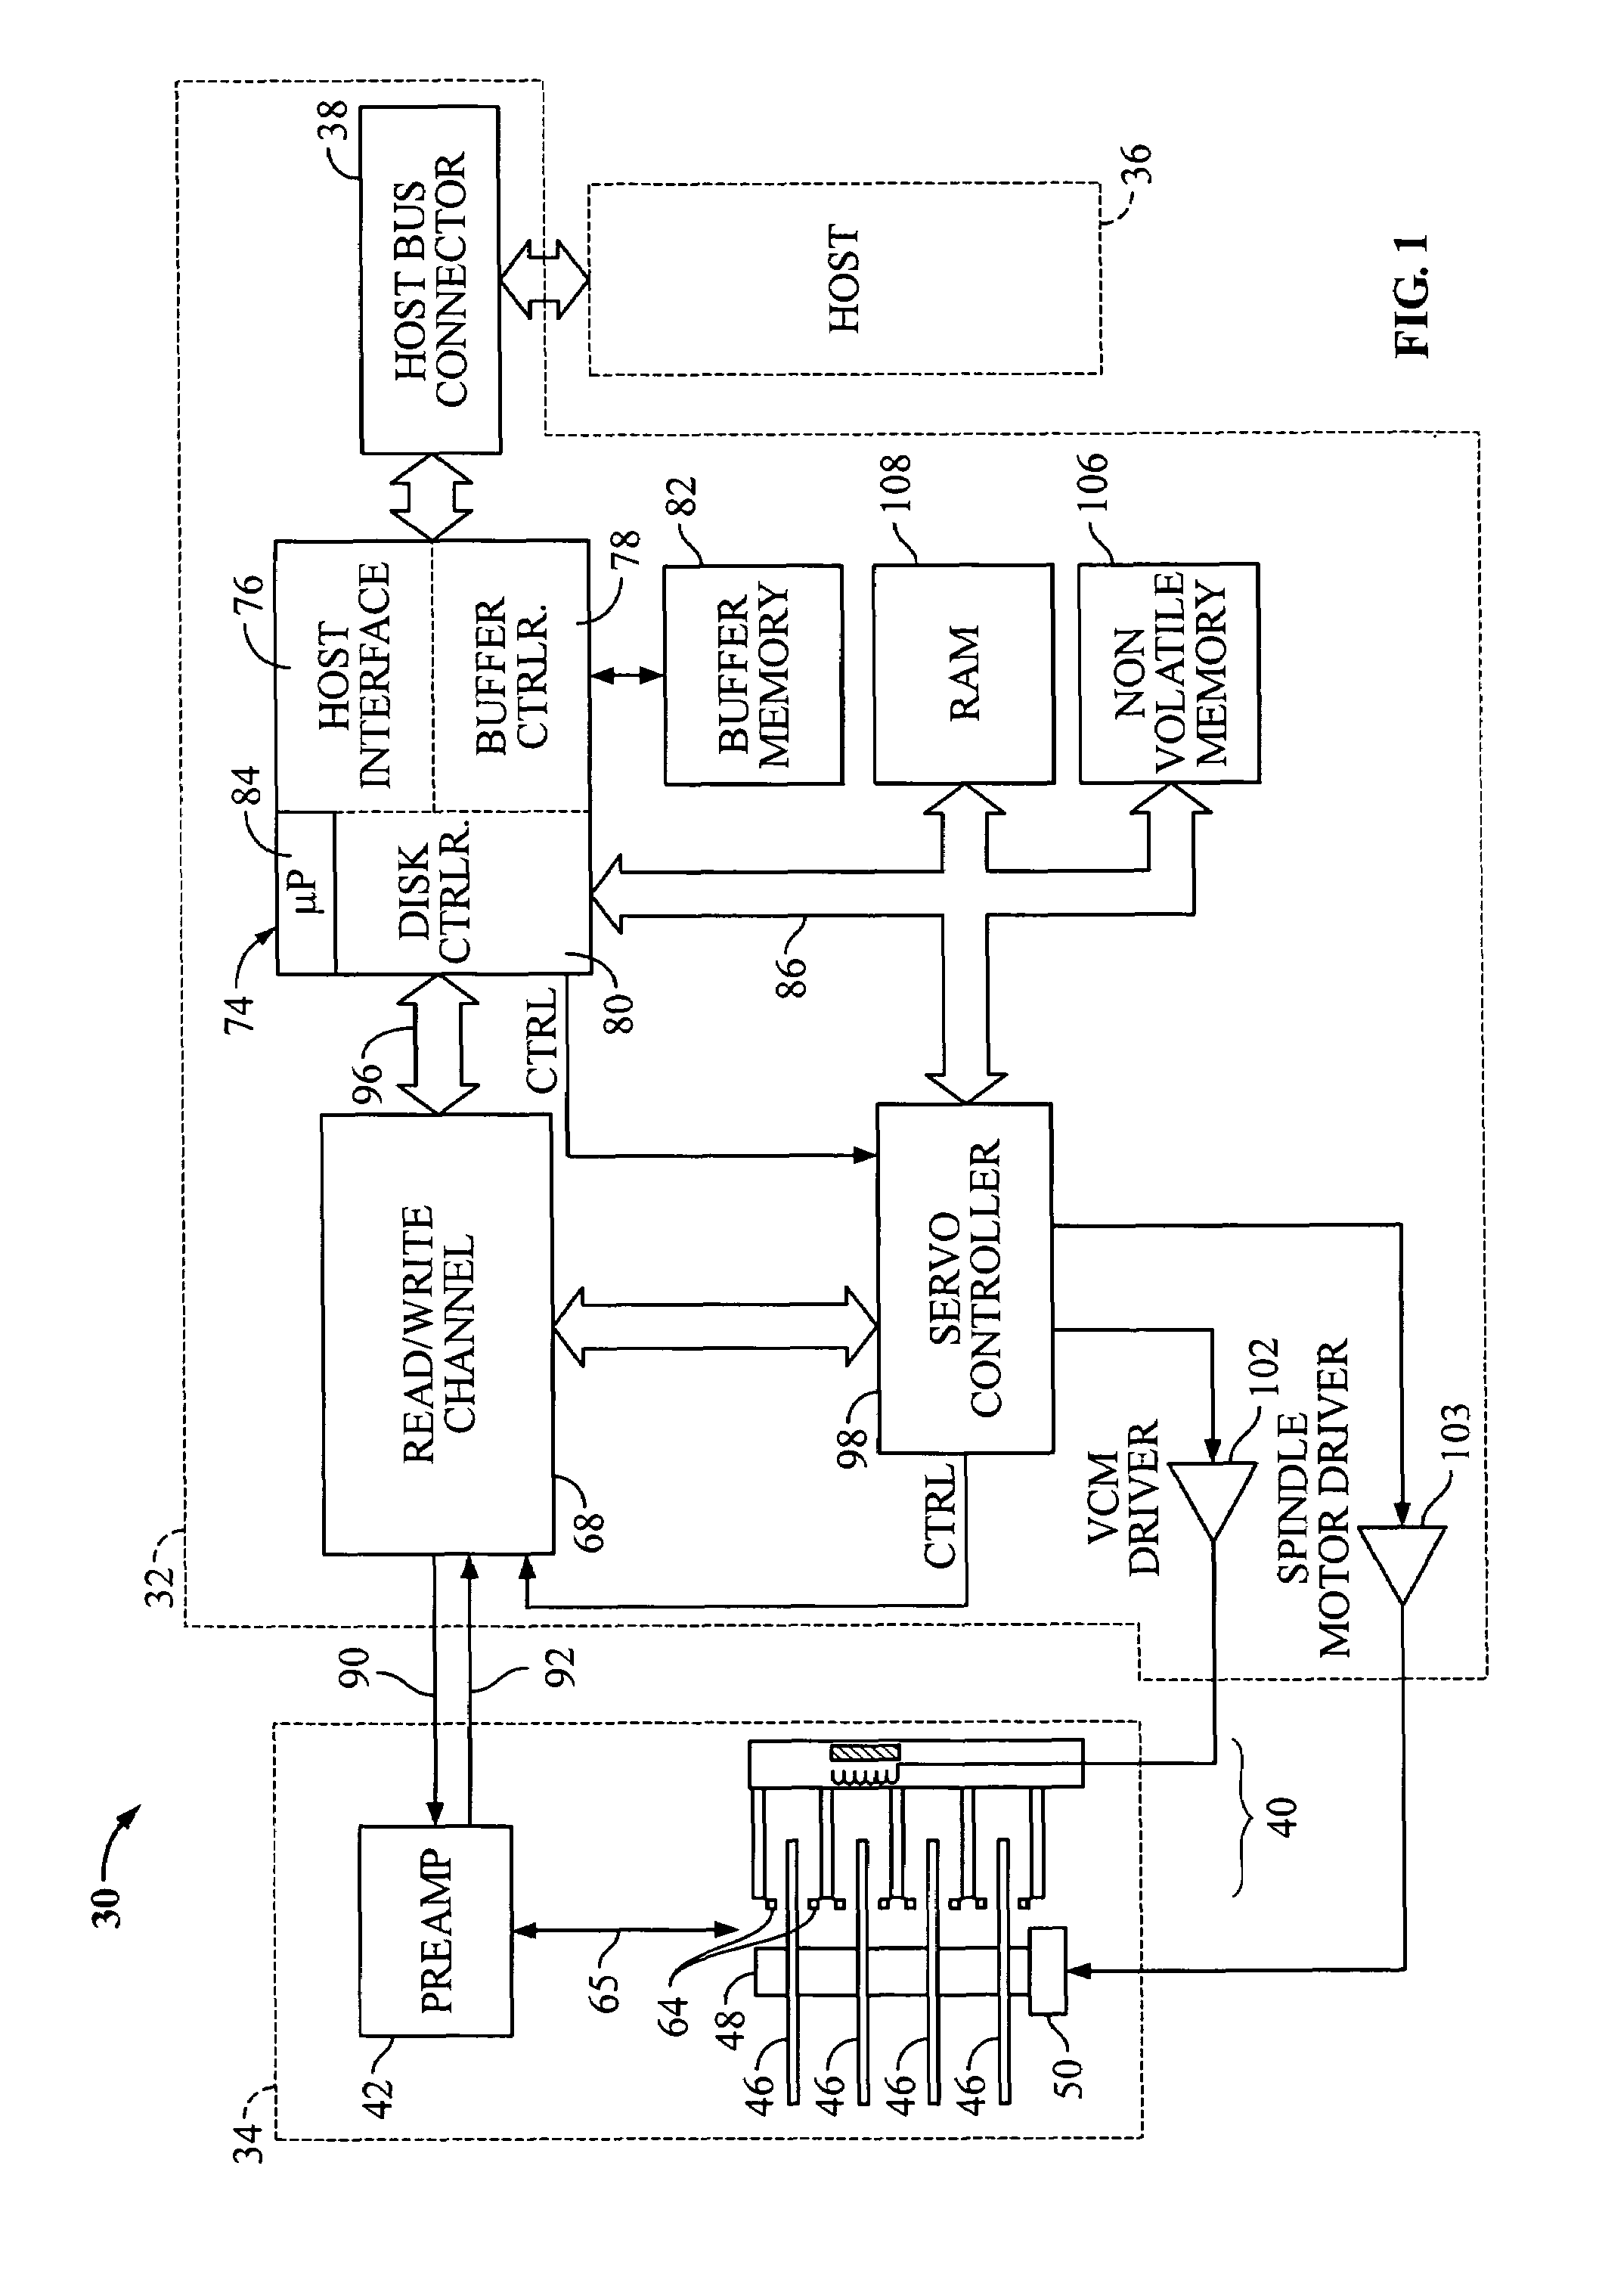 Disk drive idle mode responsive to flex circuit cable bias changes